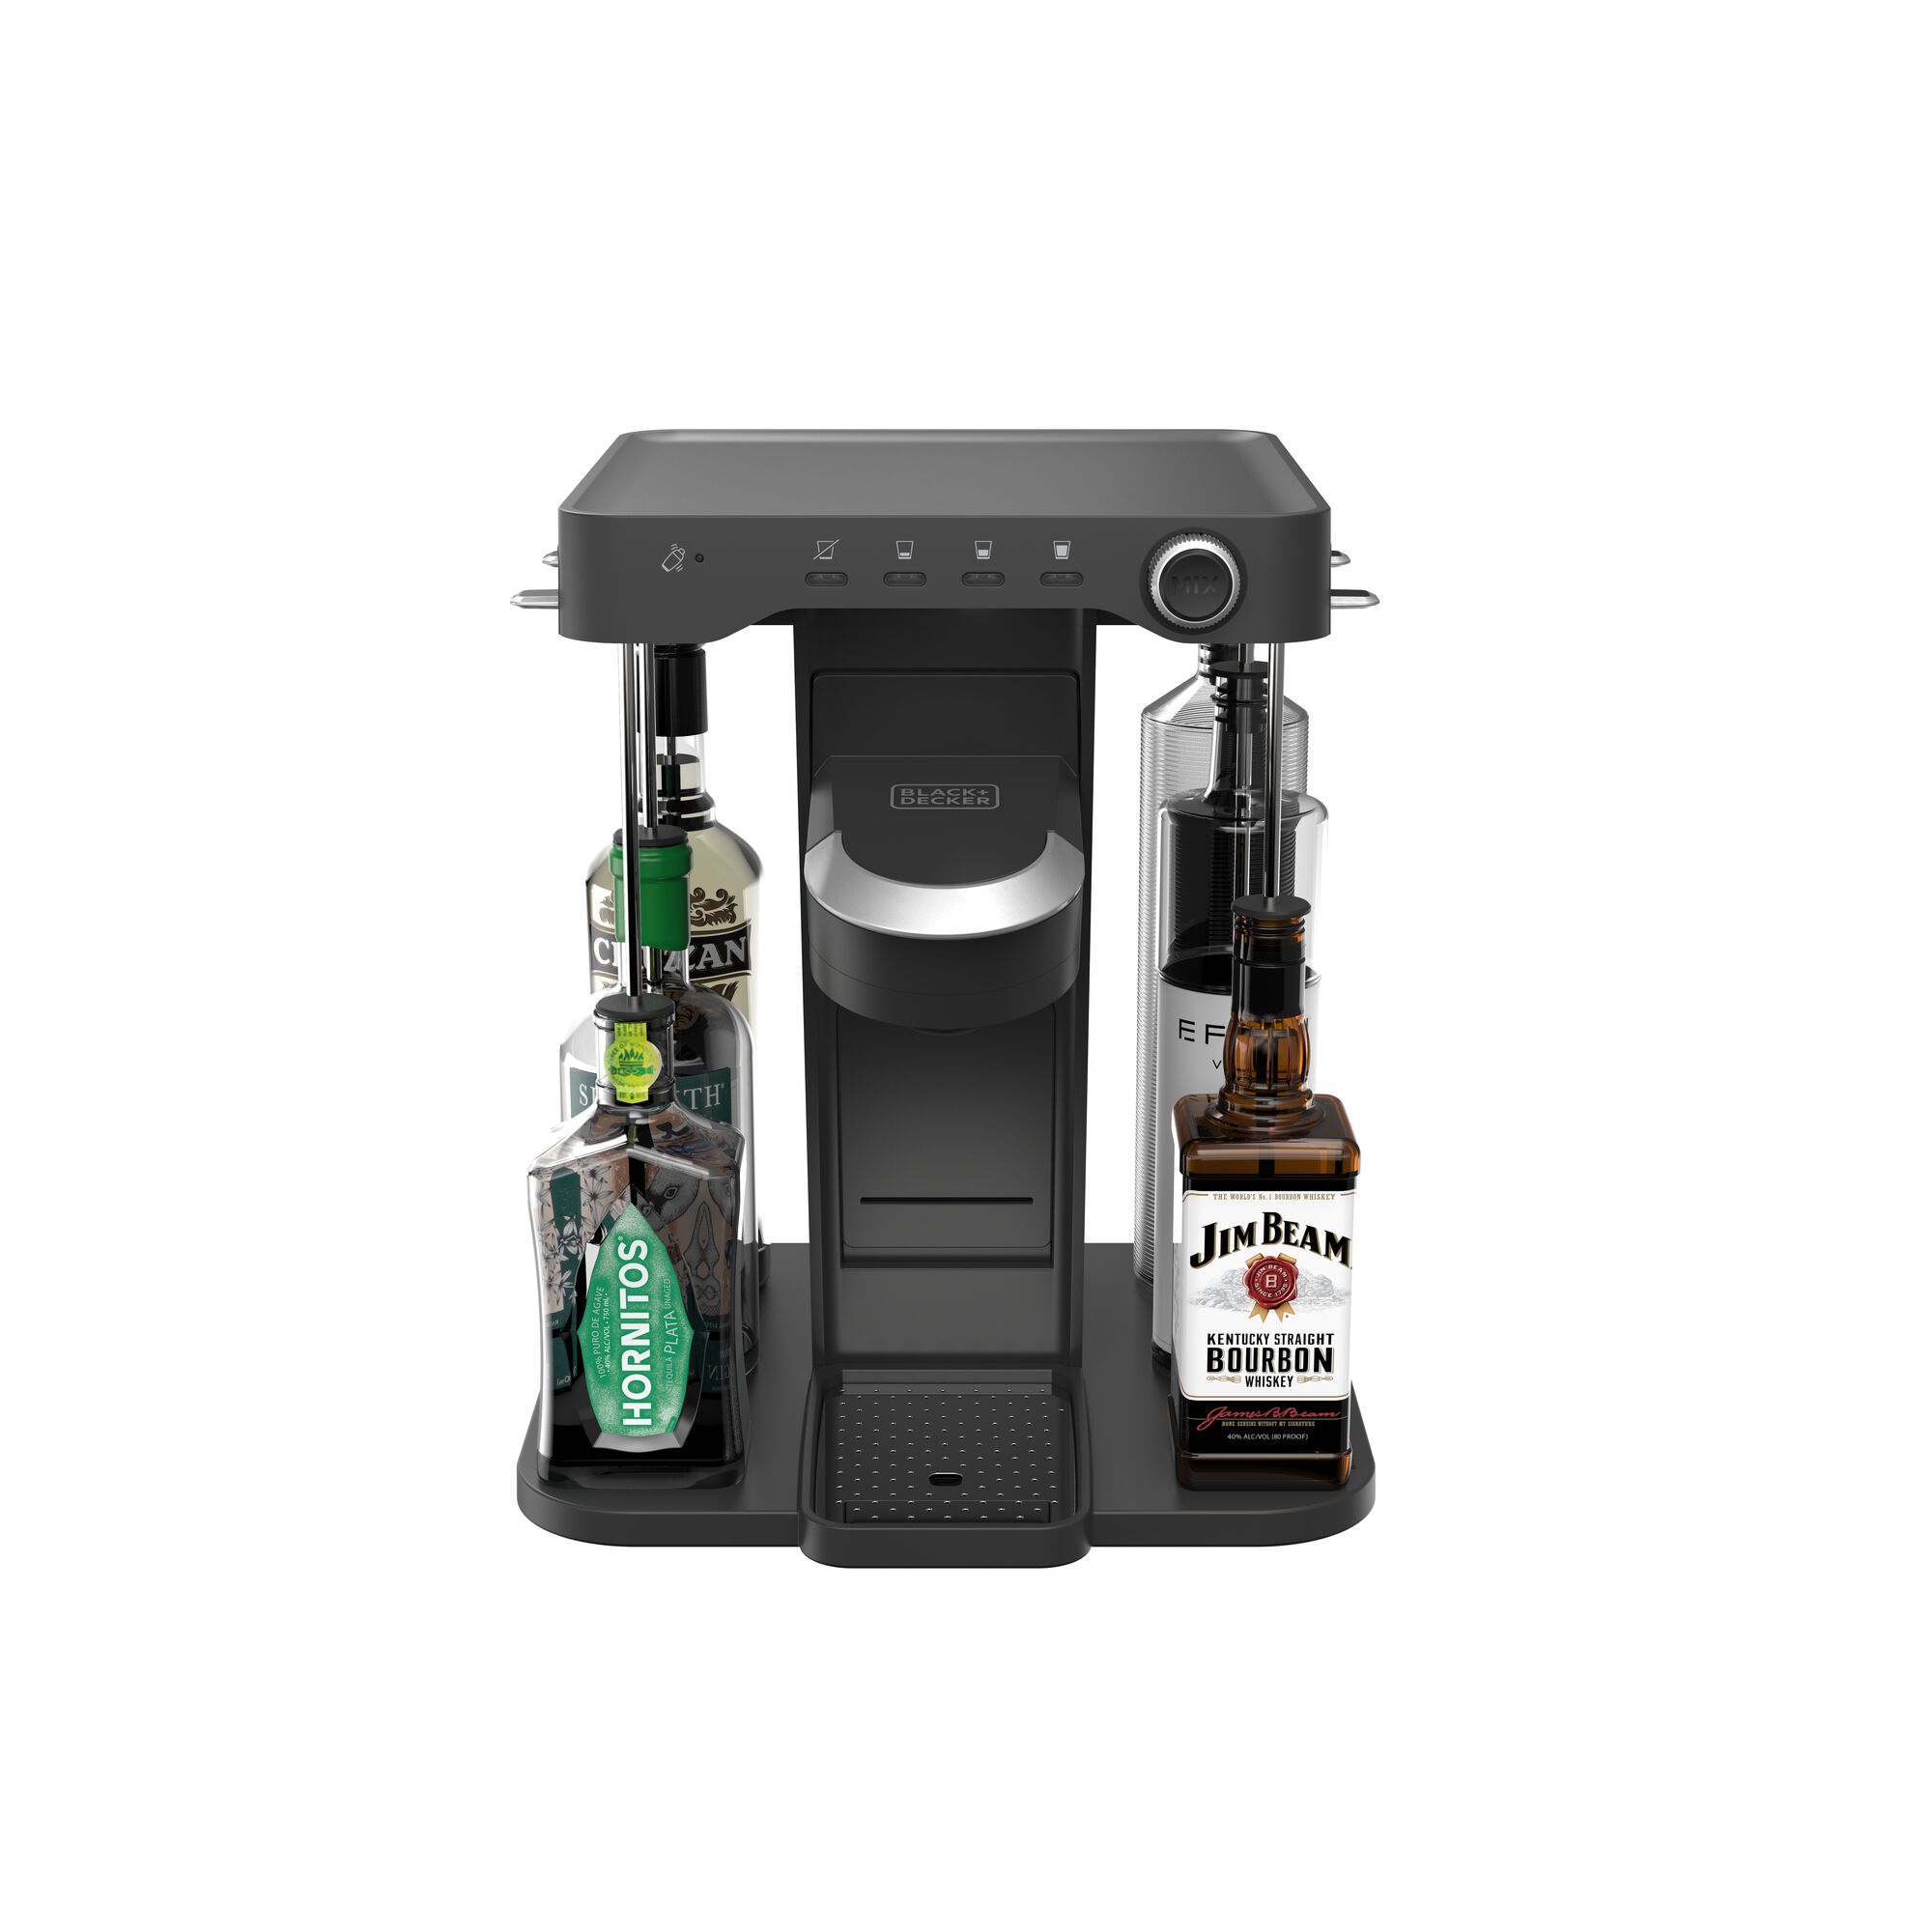 overhead front view of bev by BLACK+DECKER(TM) cordless cocktail maker wth with Jim Beam brand liquor bottles and blue LEDs illuminated underneath